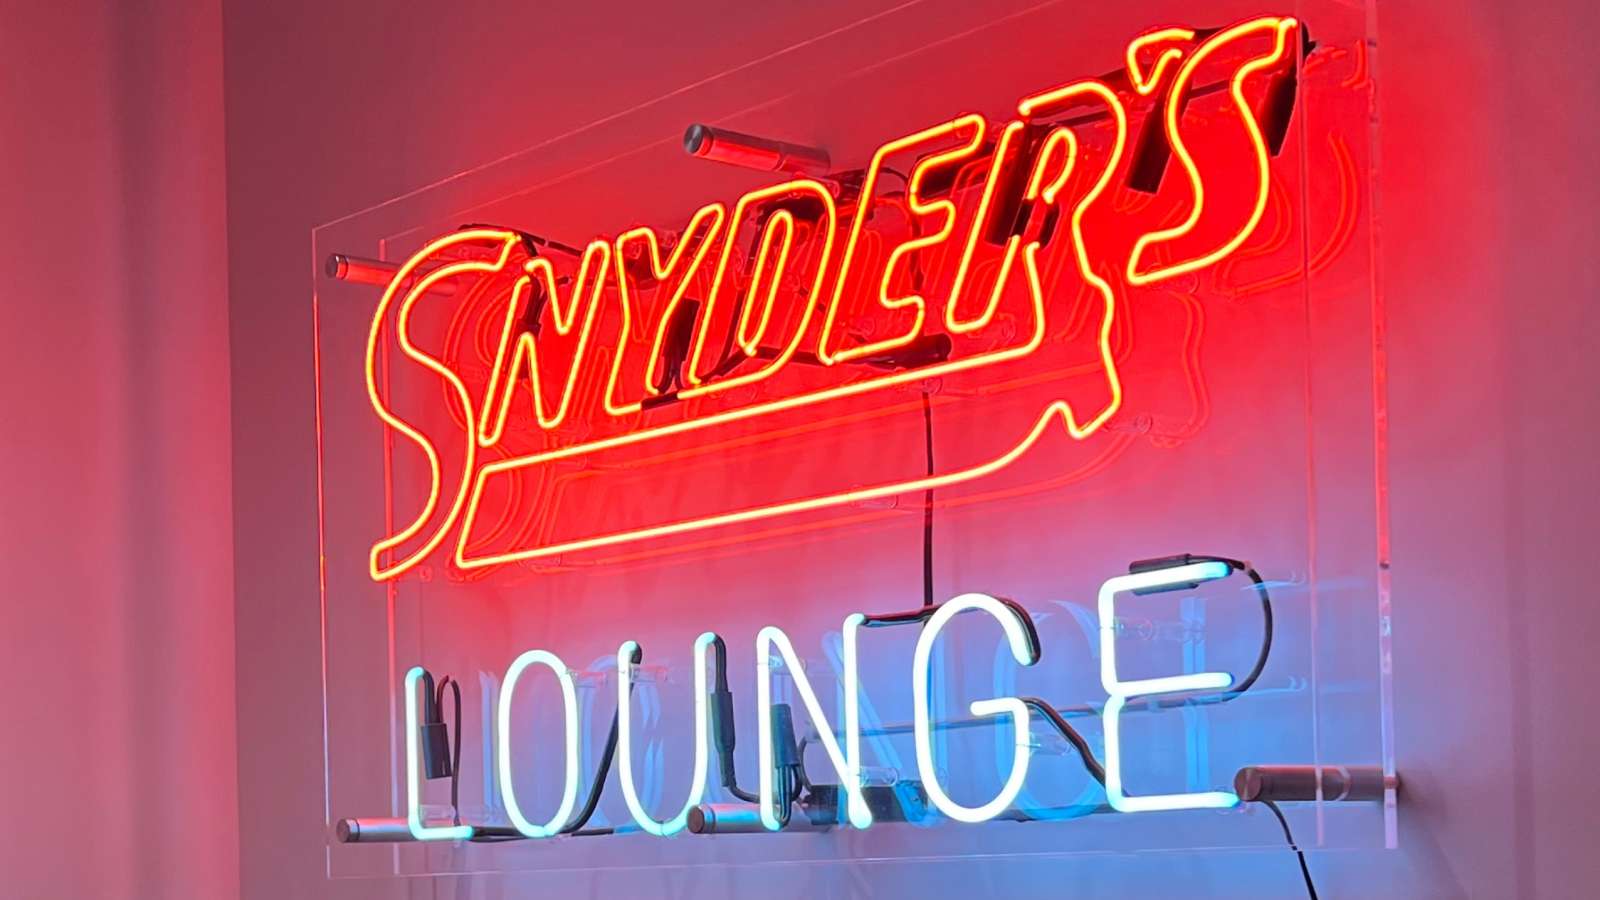 Todd Snyder neon sign